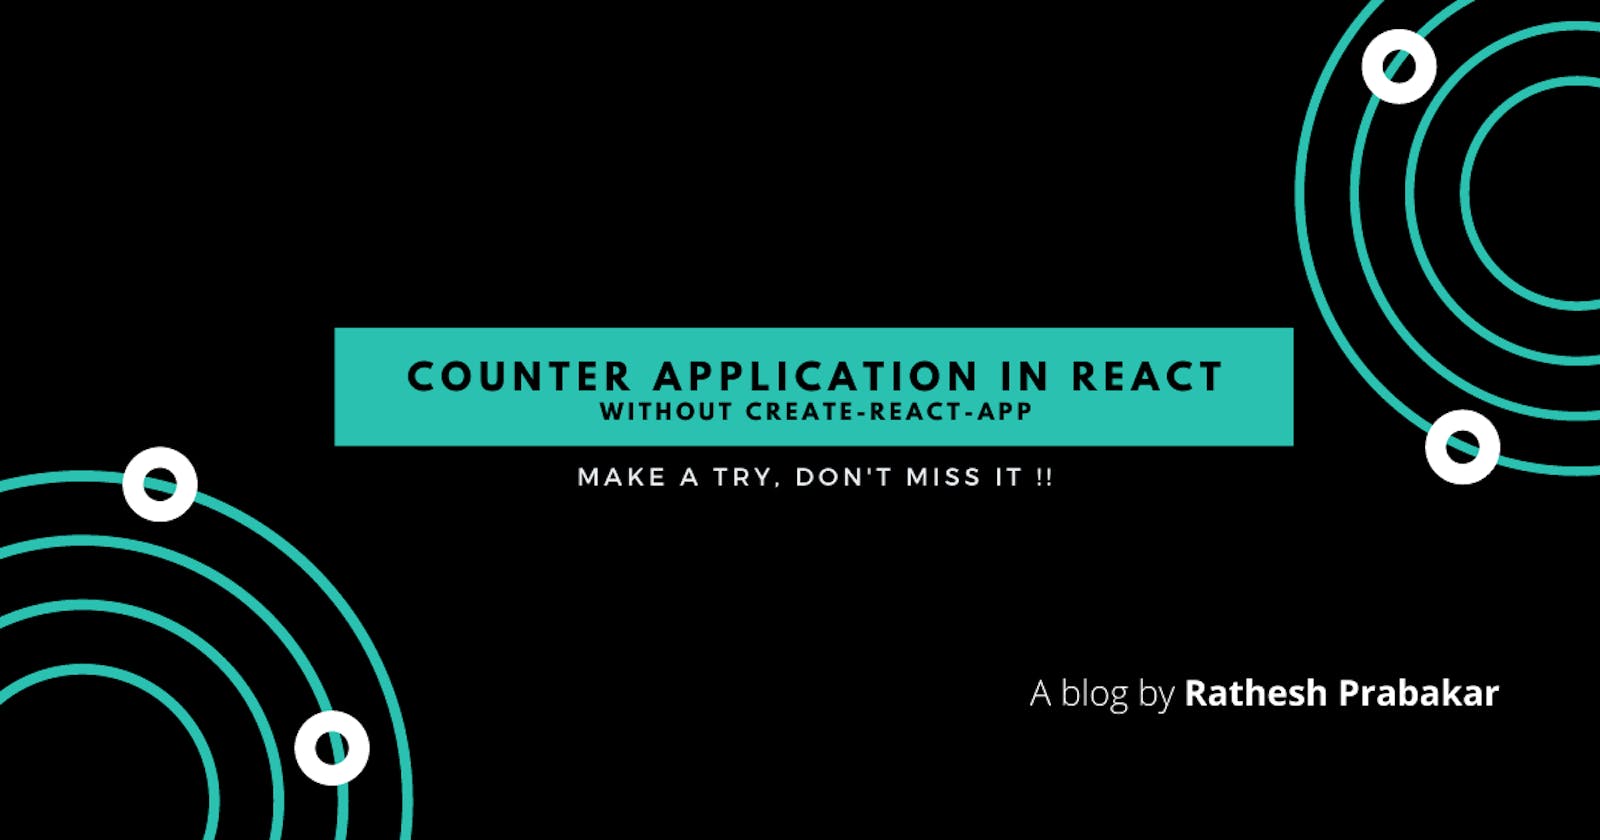 Counter app in REACT without create-react-app